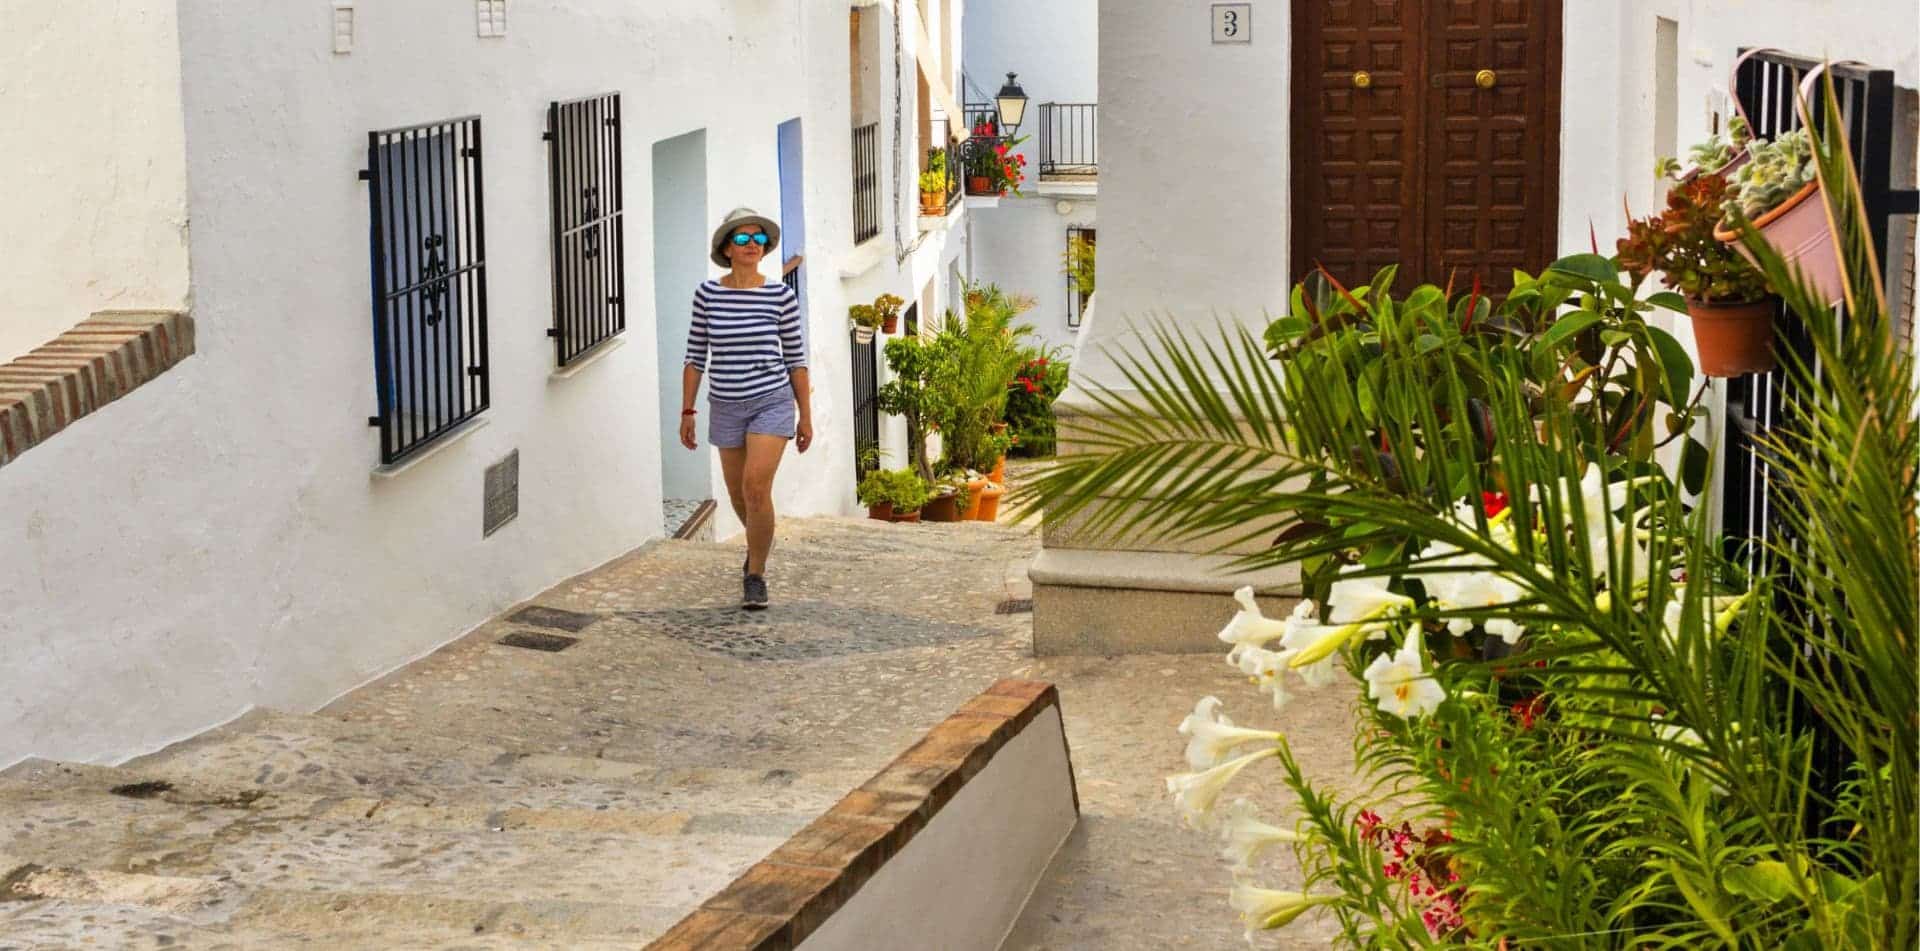 Picture yourself exploring Greece's white-washed villages with Classic Journeys